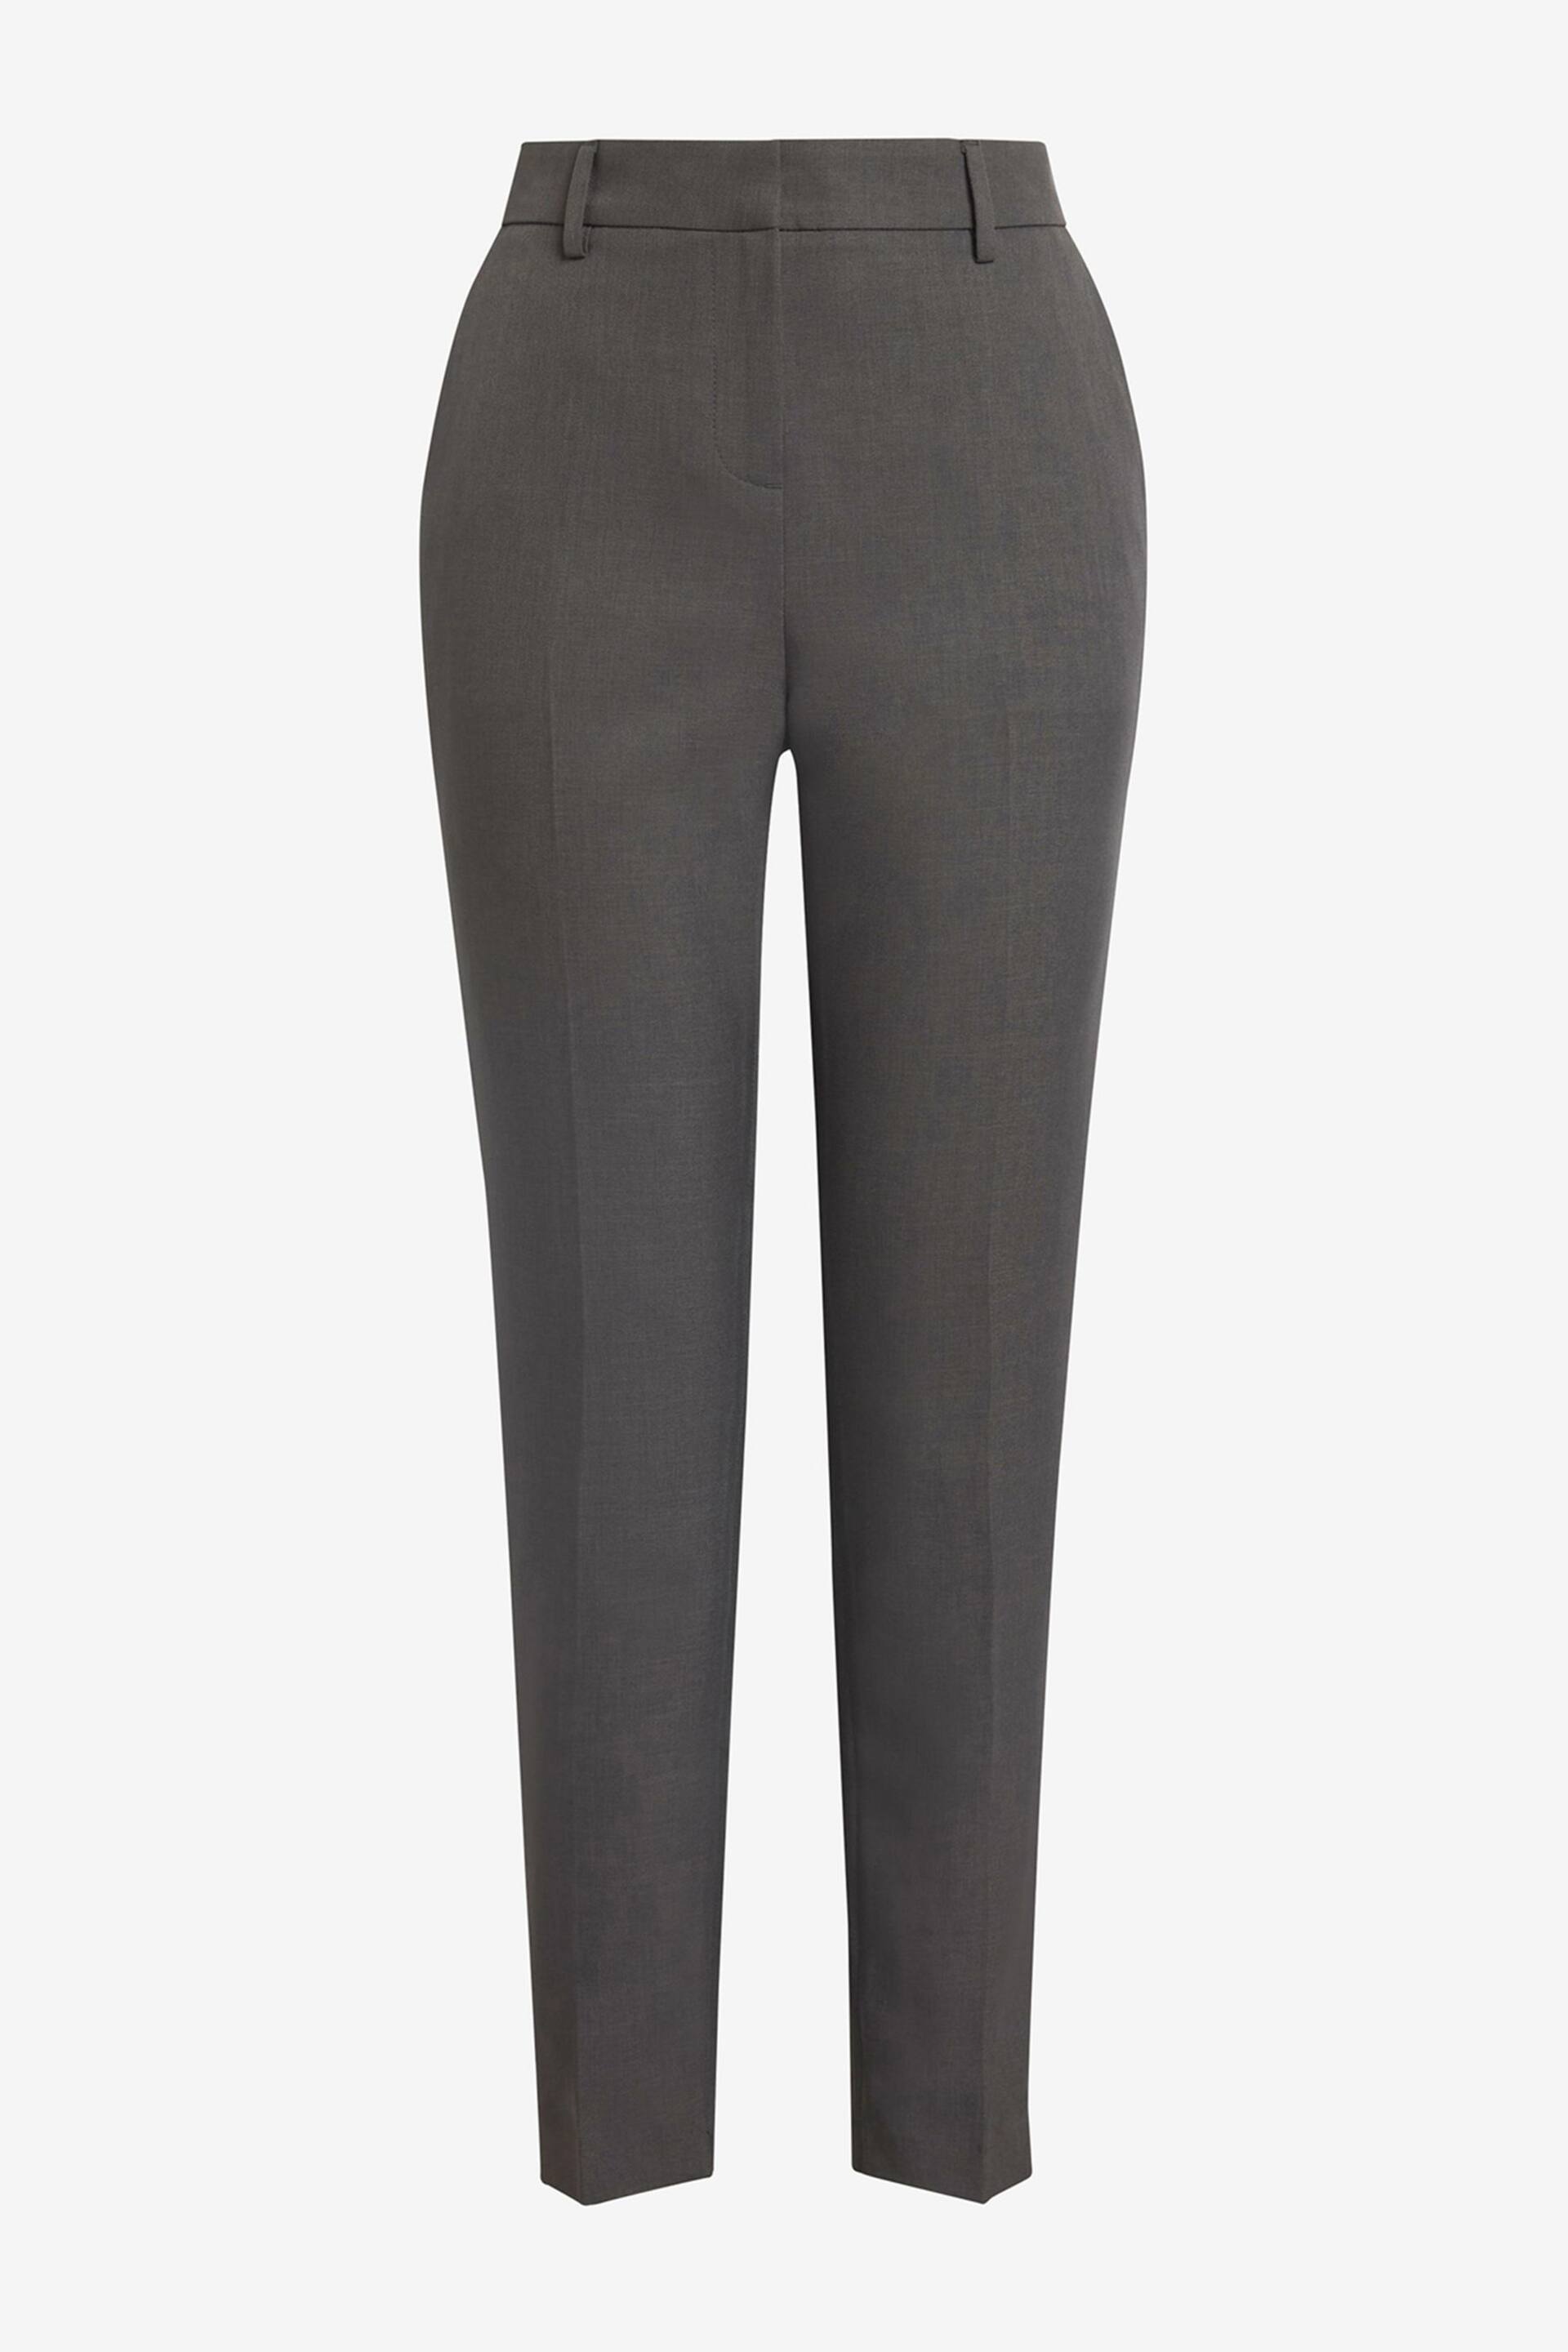 Charcoal Grey Slim Trousers - Image 5 of 5